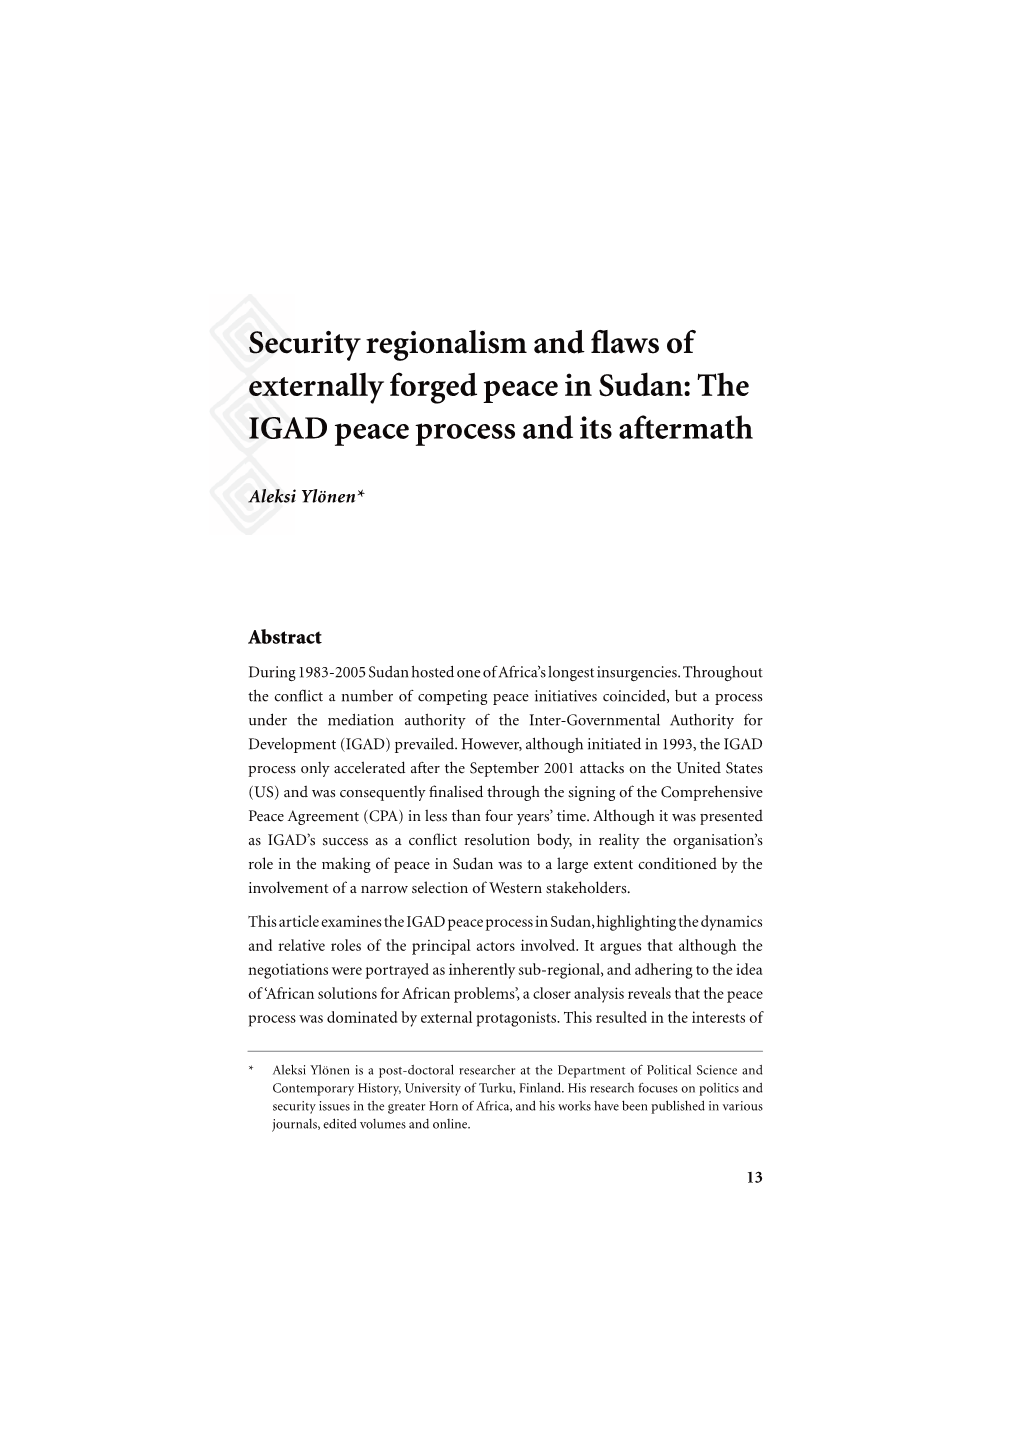 Security Regionalism and Flaws of Externally Forged Peace in Sudan: the IGAD Peace Process and Its Aftermath